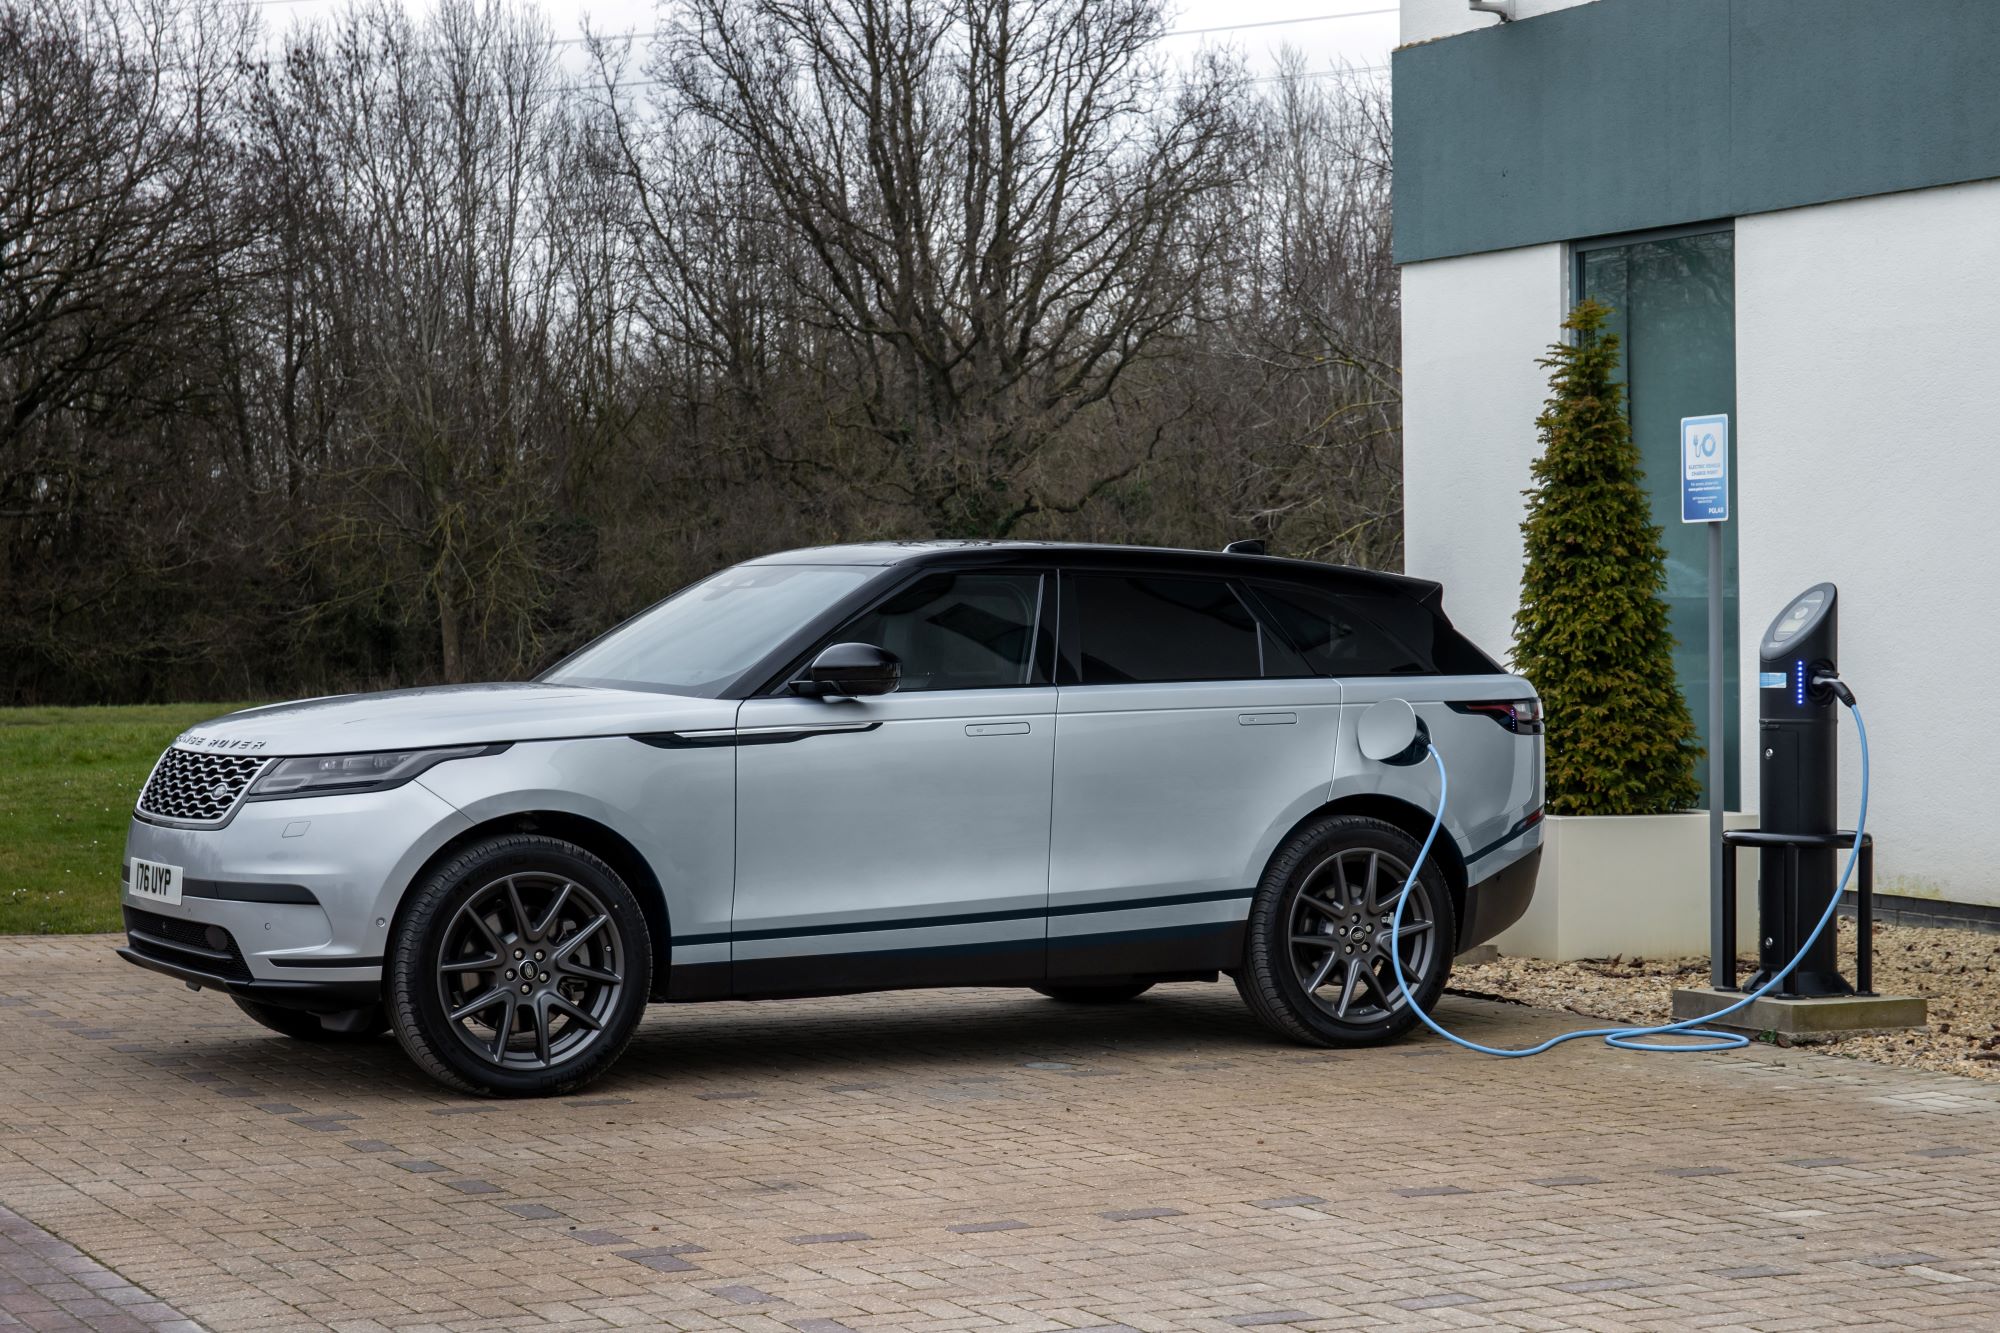 A Land Rover Range Rover Velar PHEV model connected to a charging station